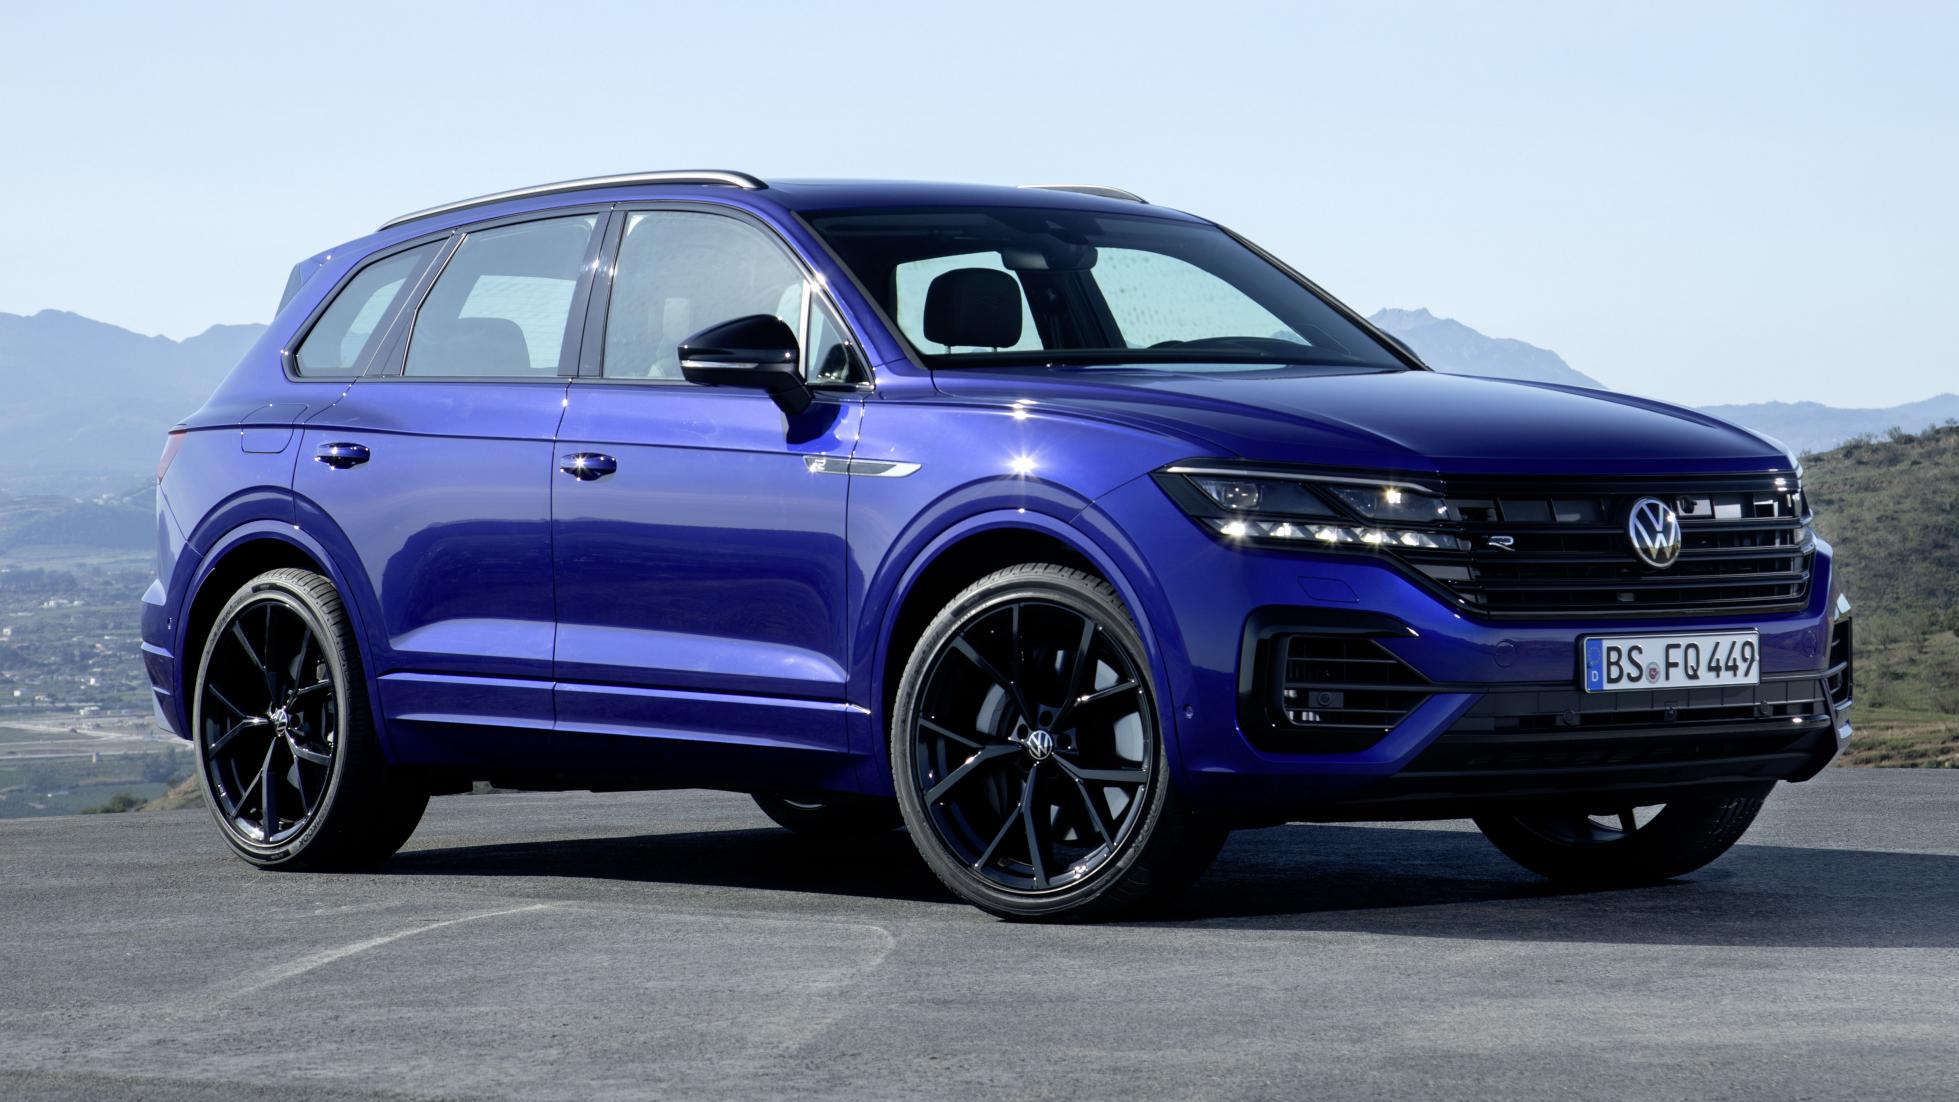 TopGear The new VW Touareg R is a 462hp hybrid SUV